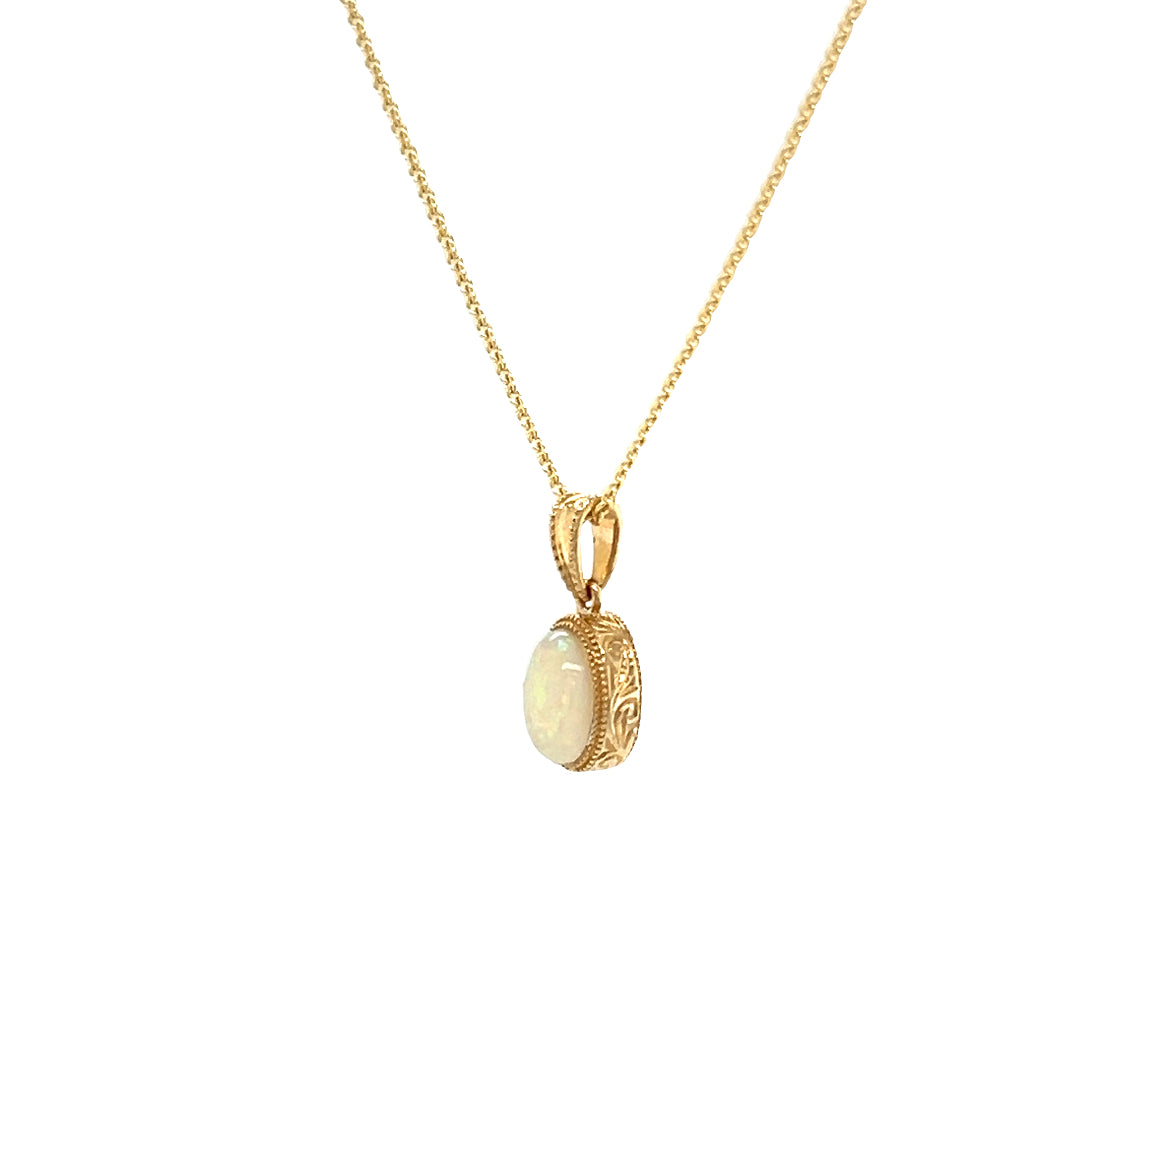 White Opal Pendant with Engraving and Milgrain Details in 14K Yellow Gold Right Profile View